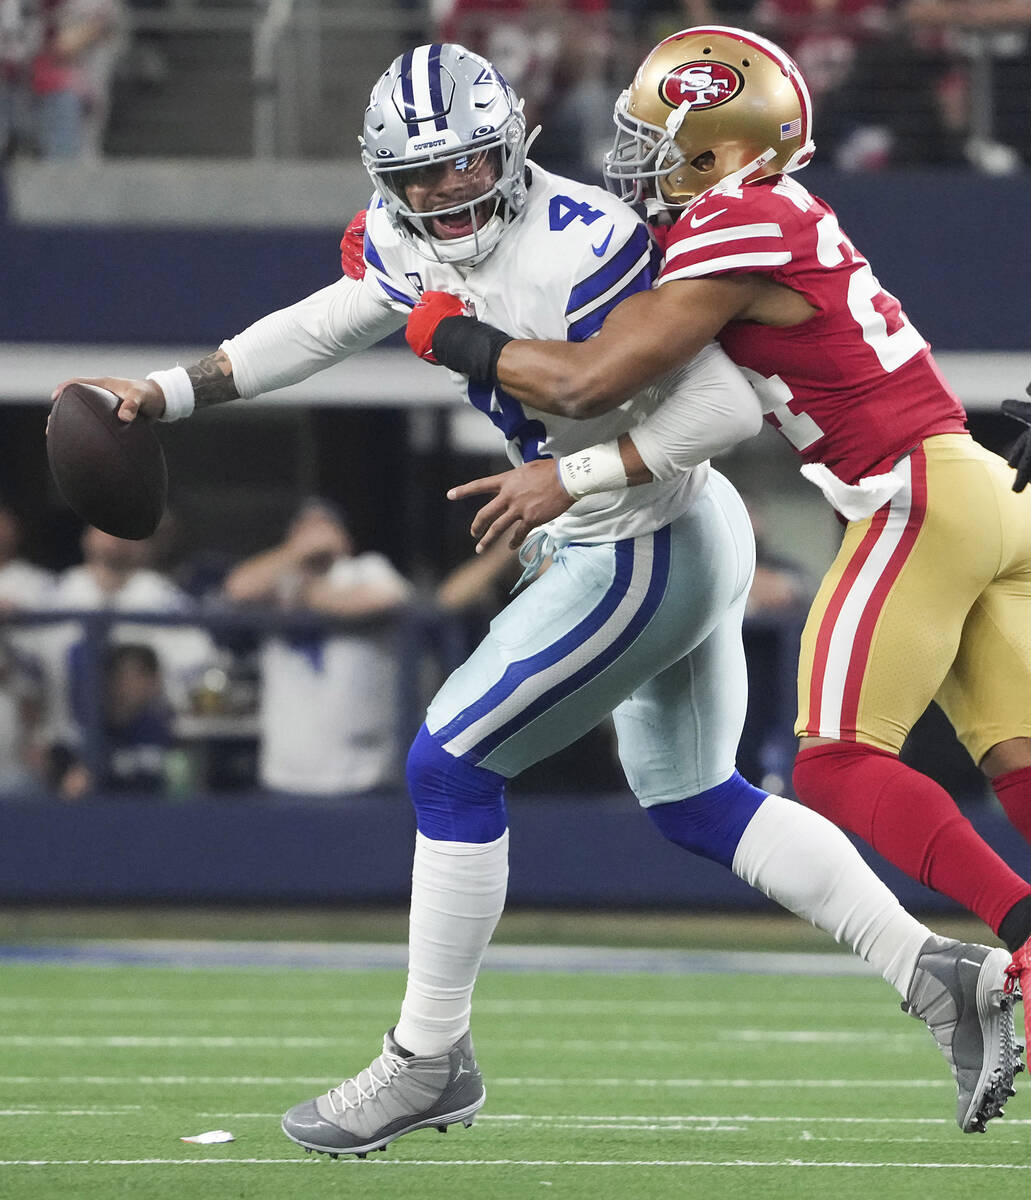 49ers hang on for 23-17 wild-card playoff victory over Cowboys